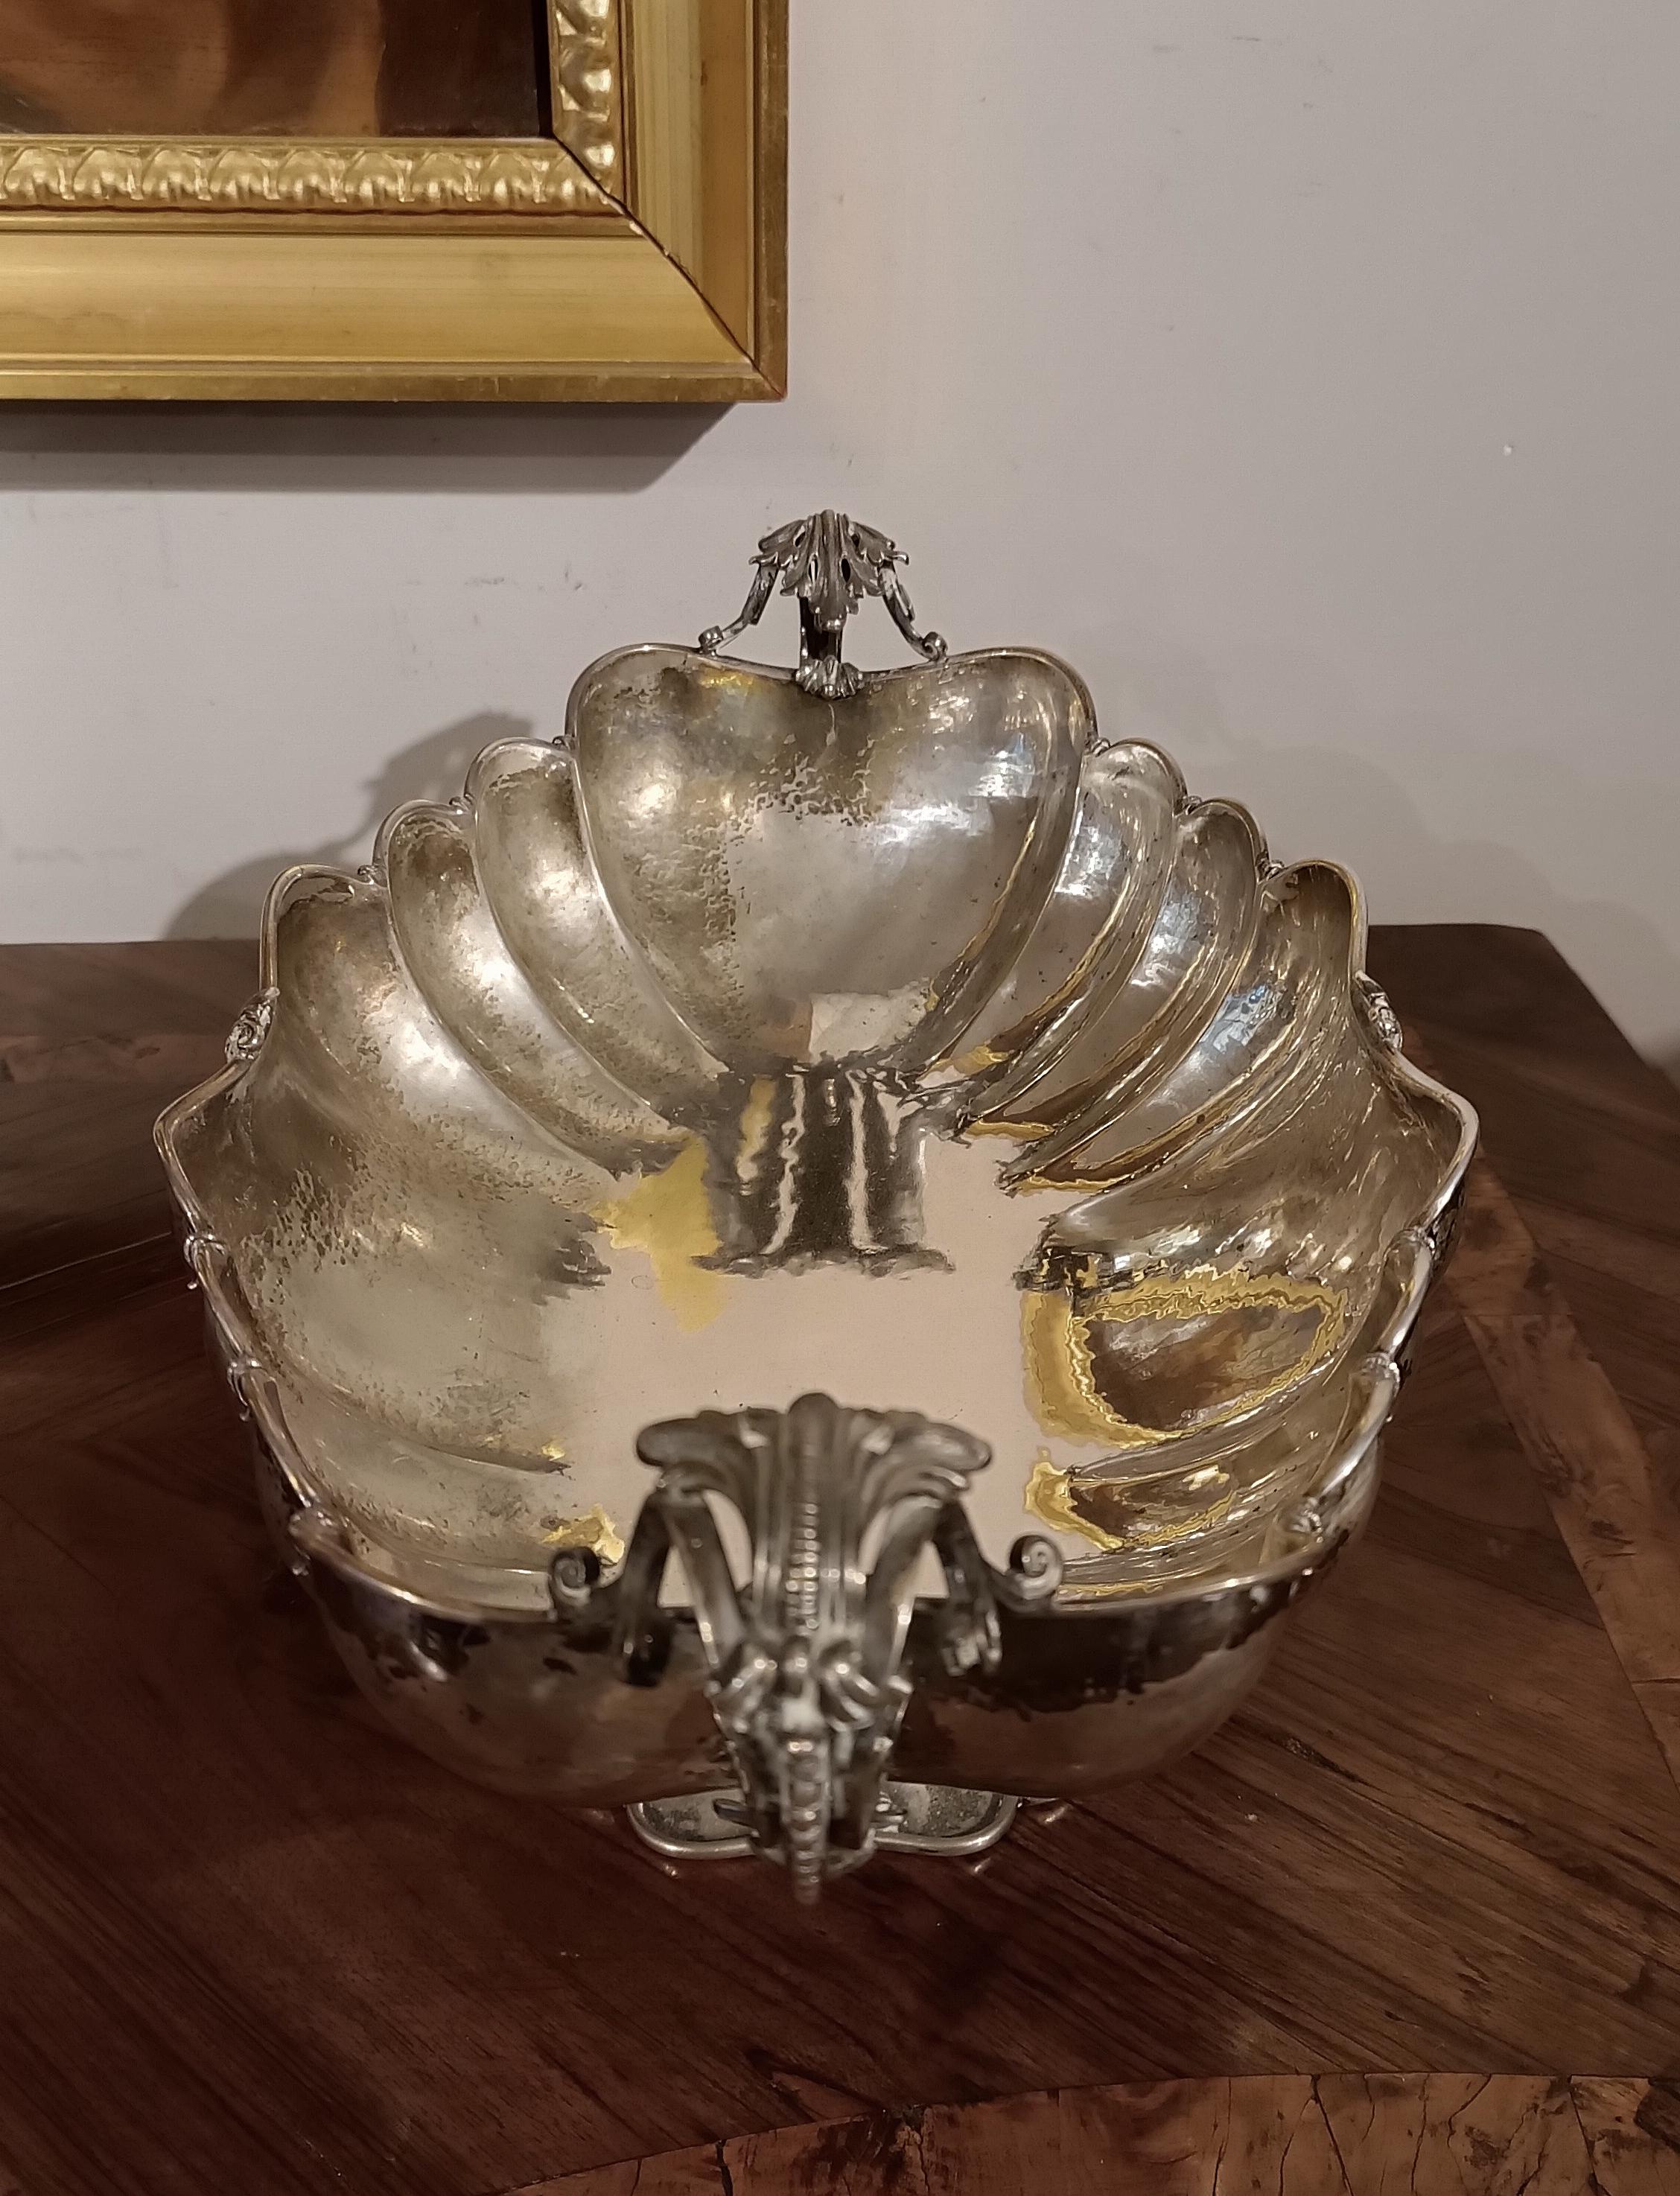 LATE 19th-EARLY 20th CENTURY ITALIAN SILVER CENTERPIECE For Sale 6